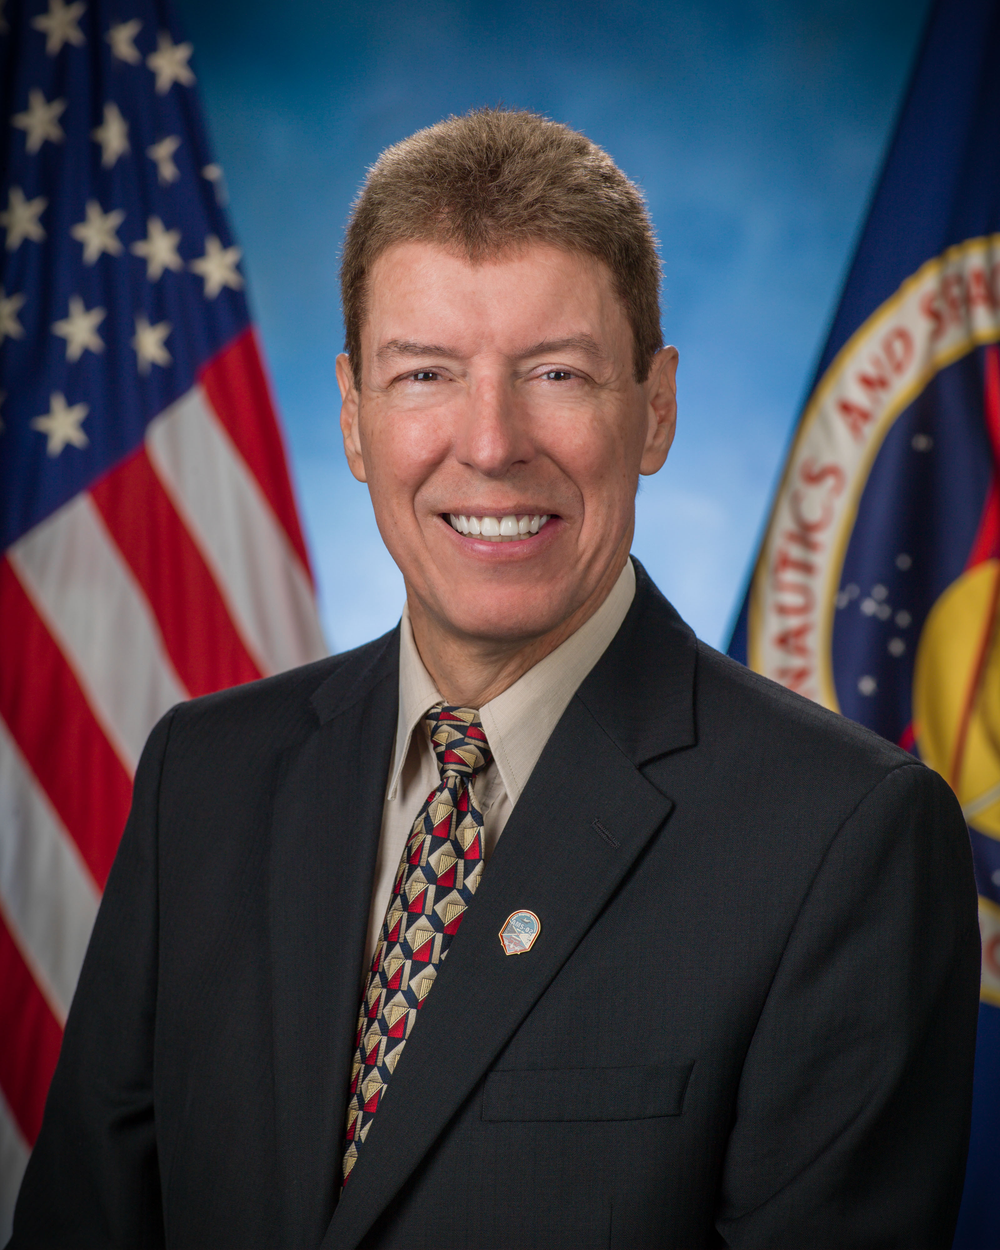 A person wearing a black suit and multicolored tie smiles in front of a blue background and a U.S. flag (left) and NASA flag (right).